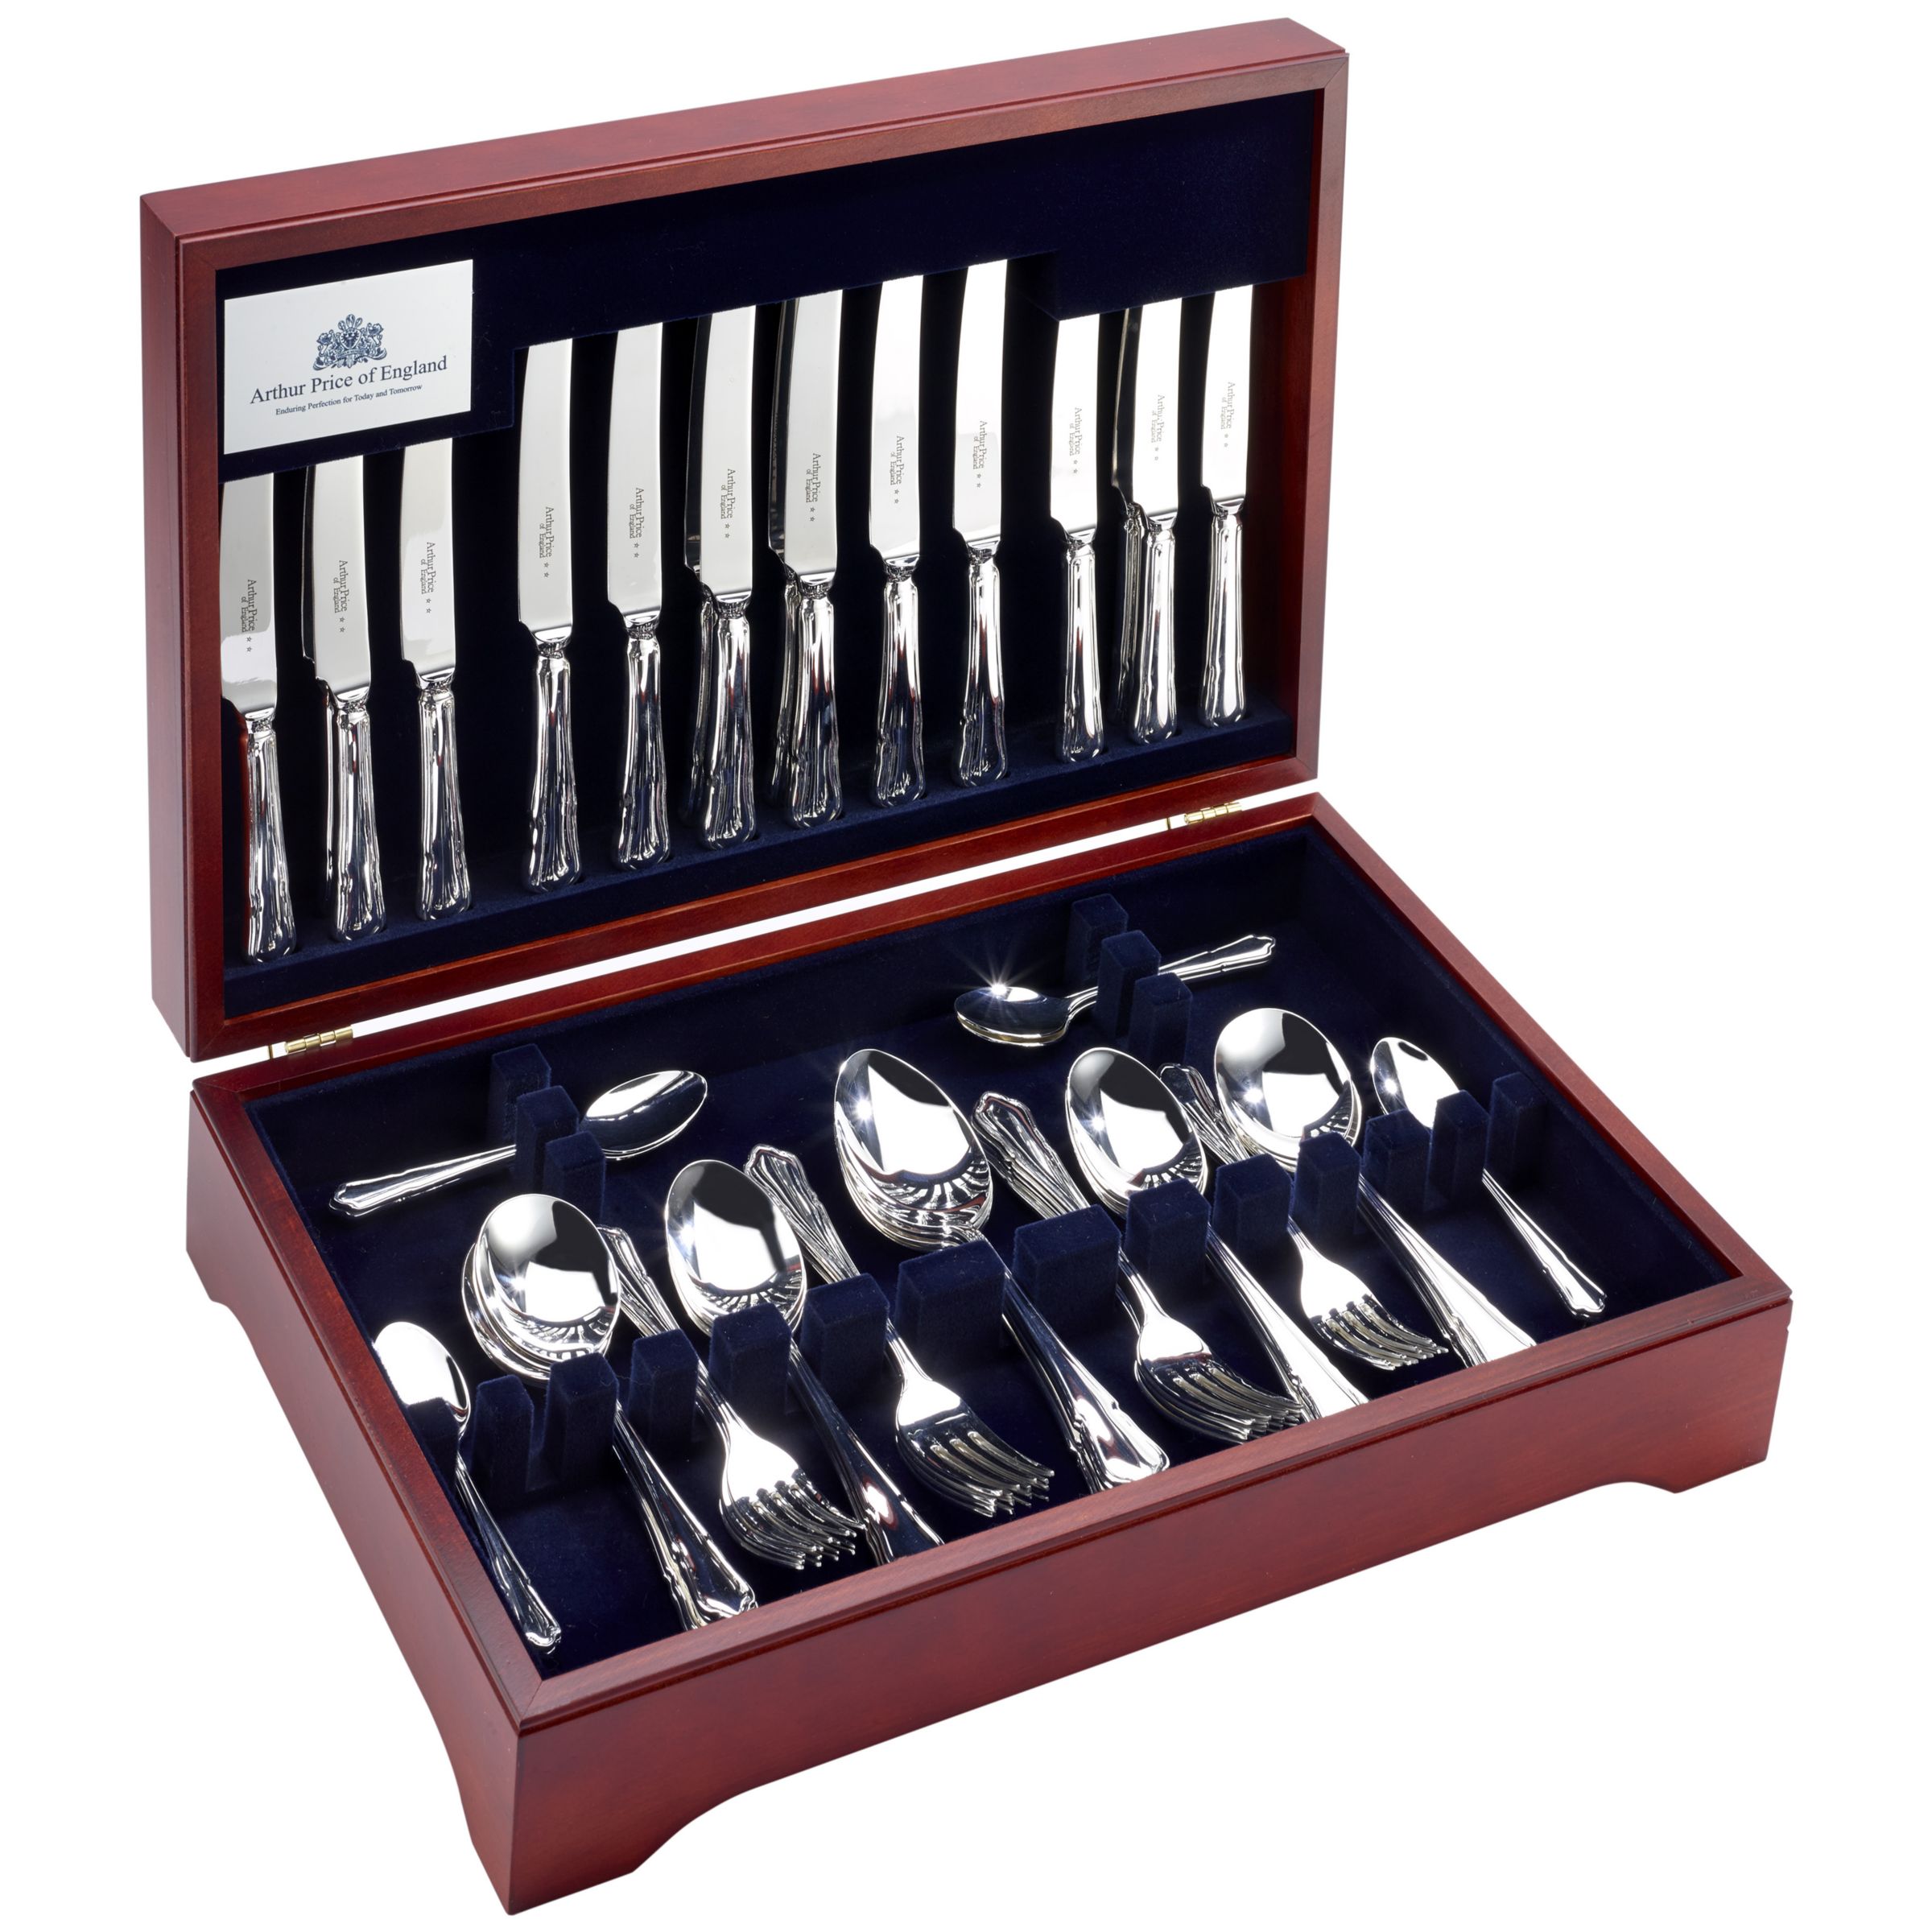 Arthur Price Dubarry Cutlery Canteen, Sovereign Silver Plated, 44 Piece/6 Place Settings